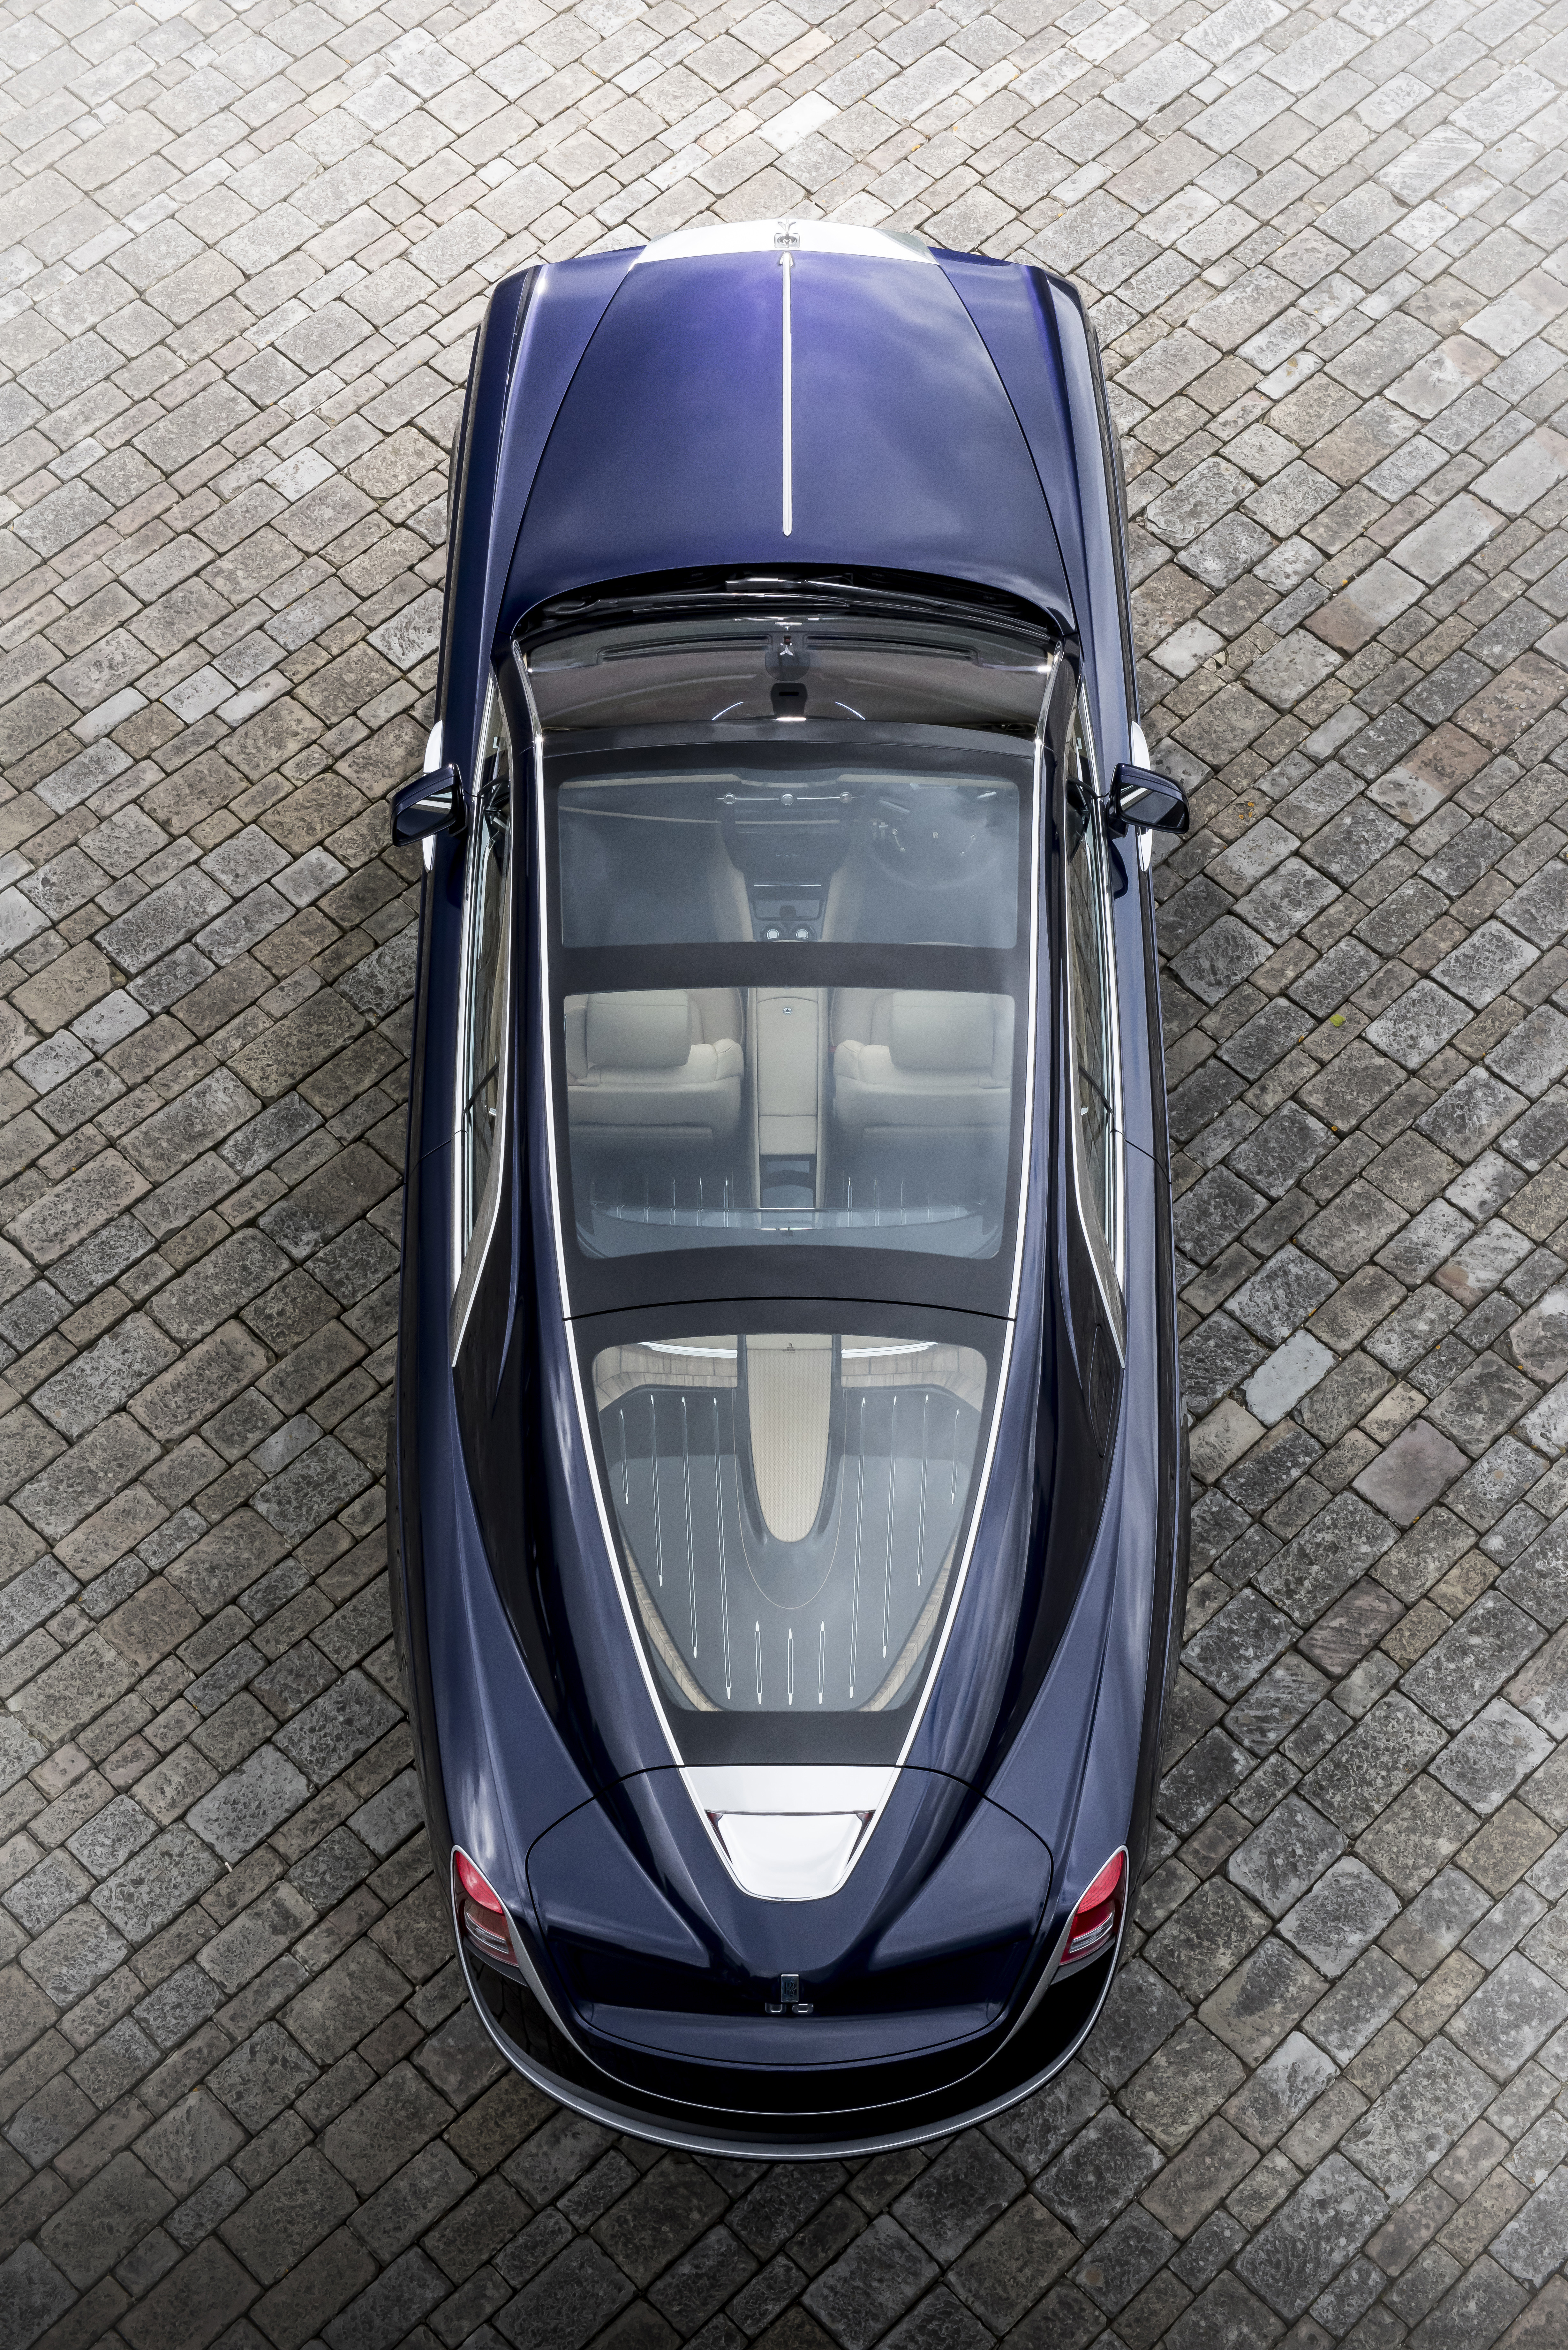 The Rolls-Royce Sweptail